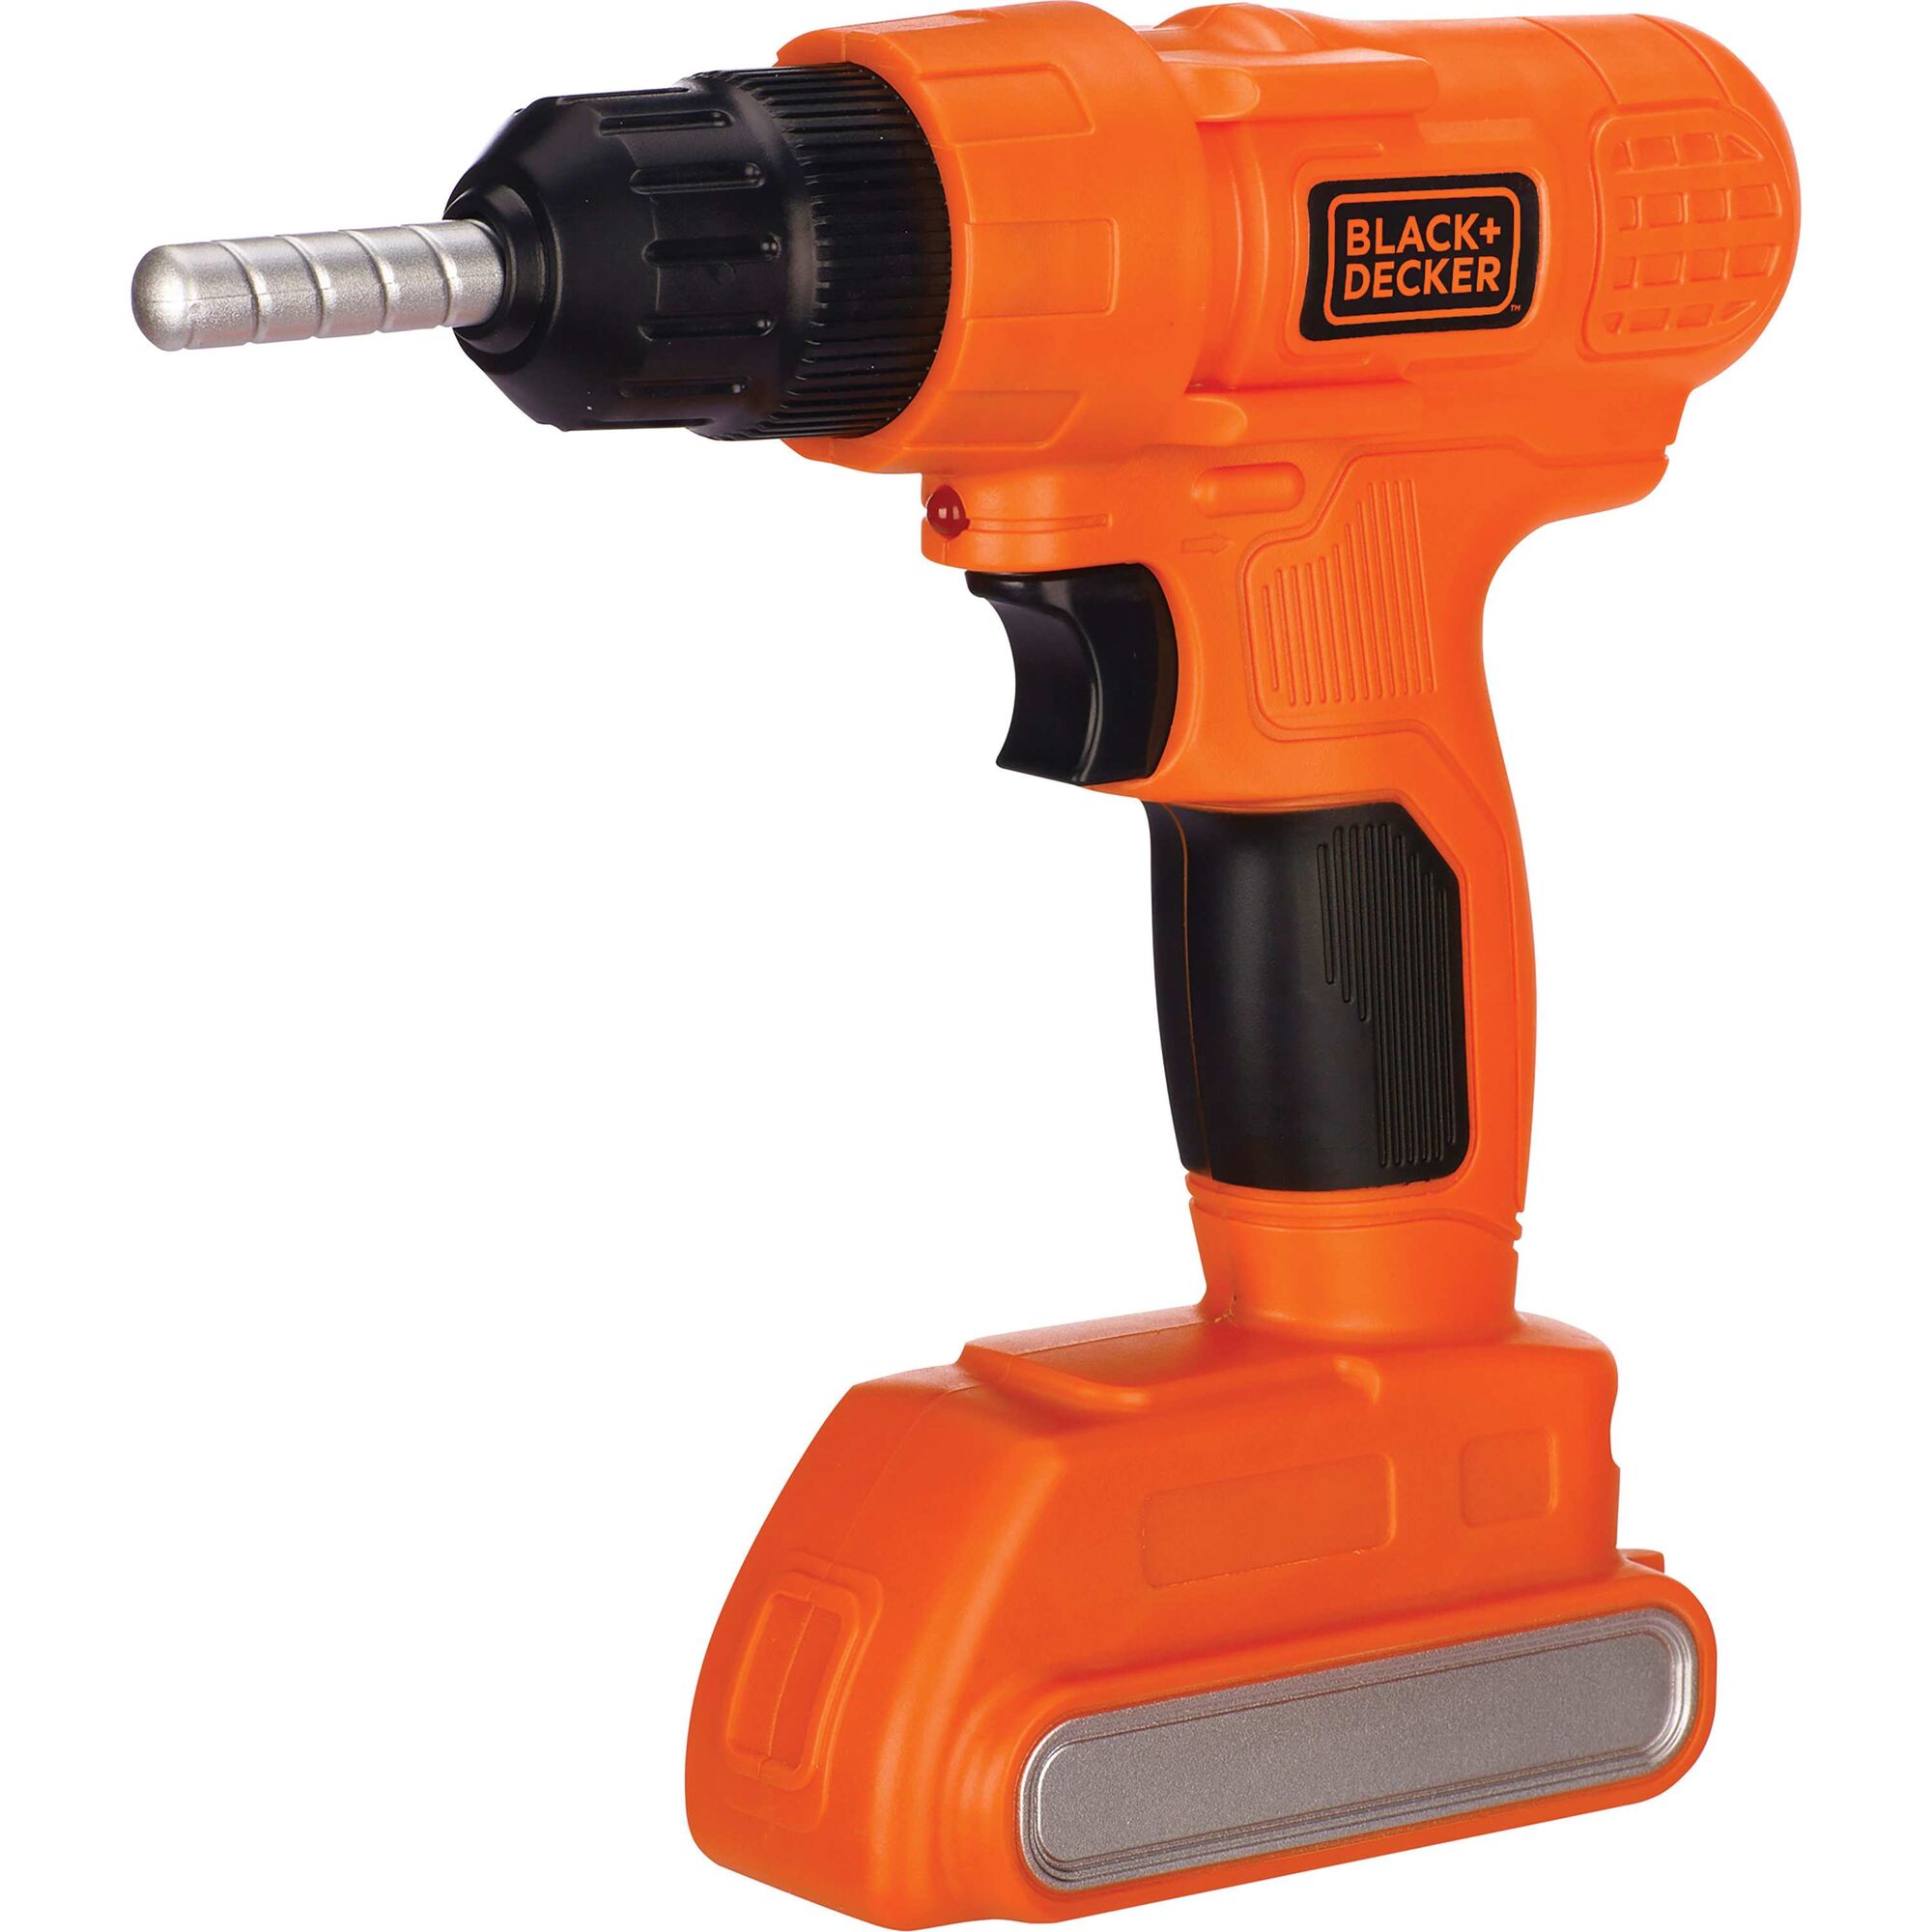 Power Drill toy.